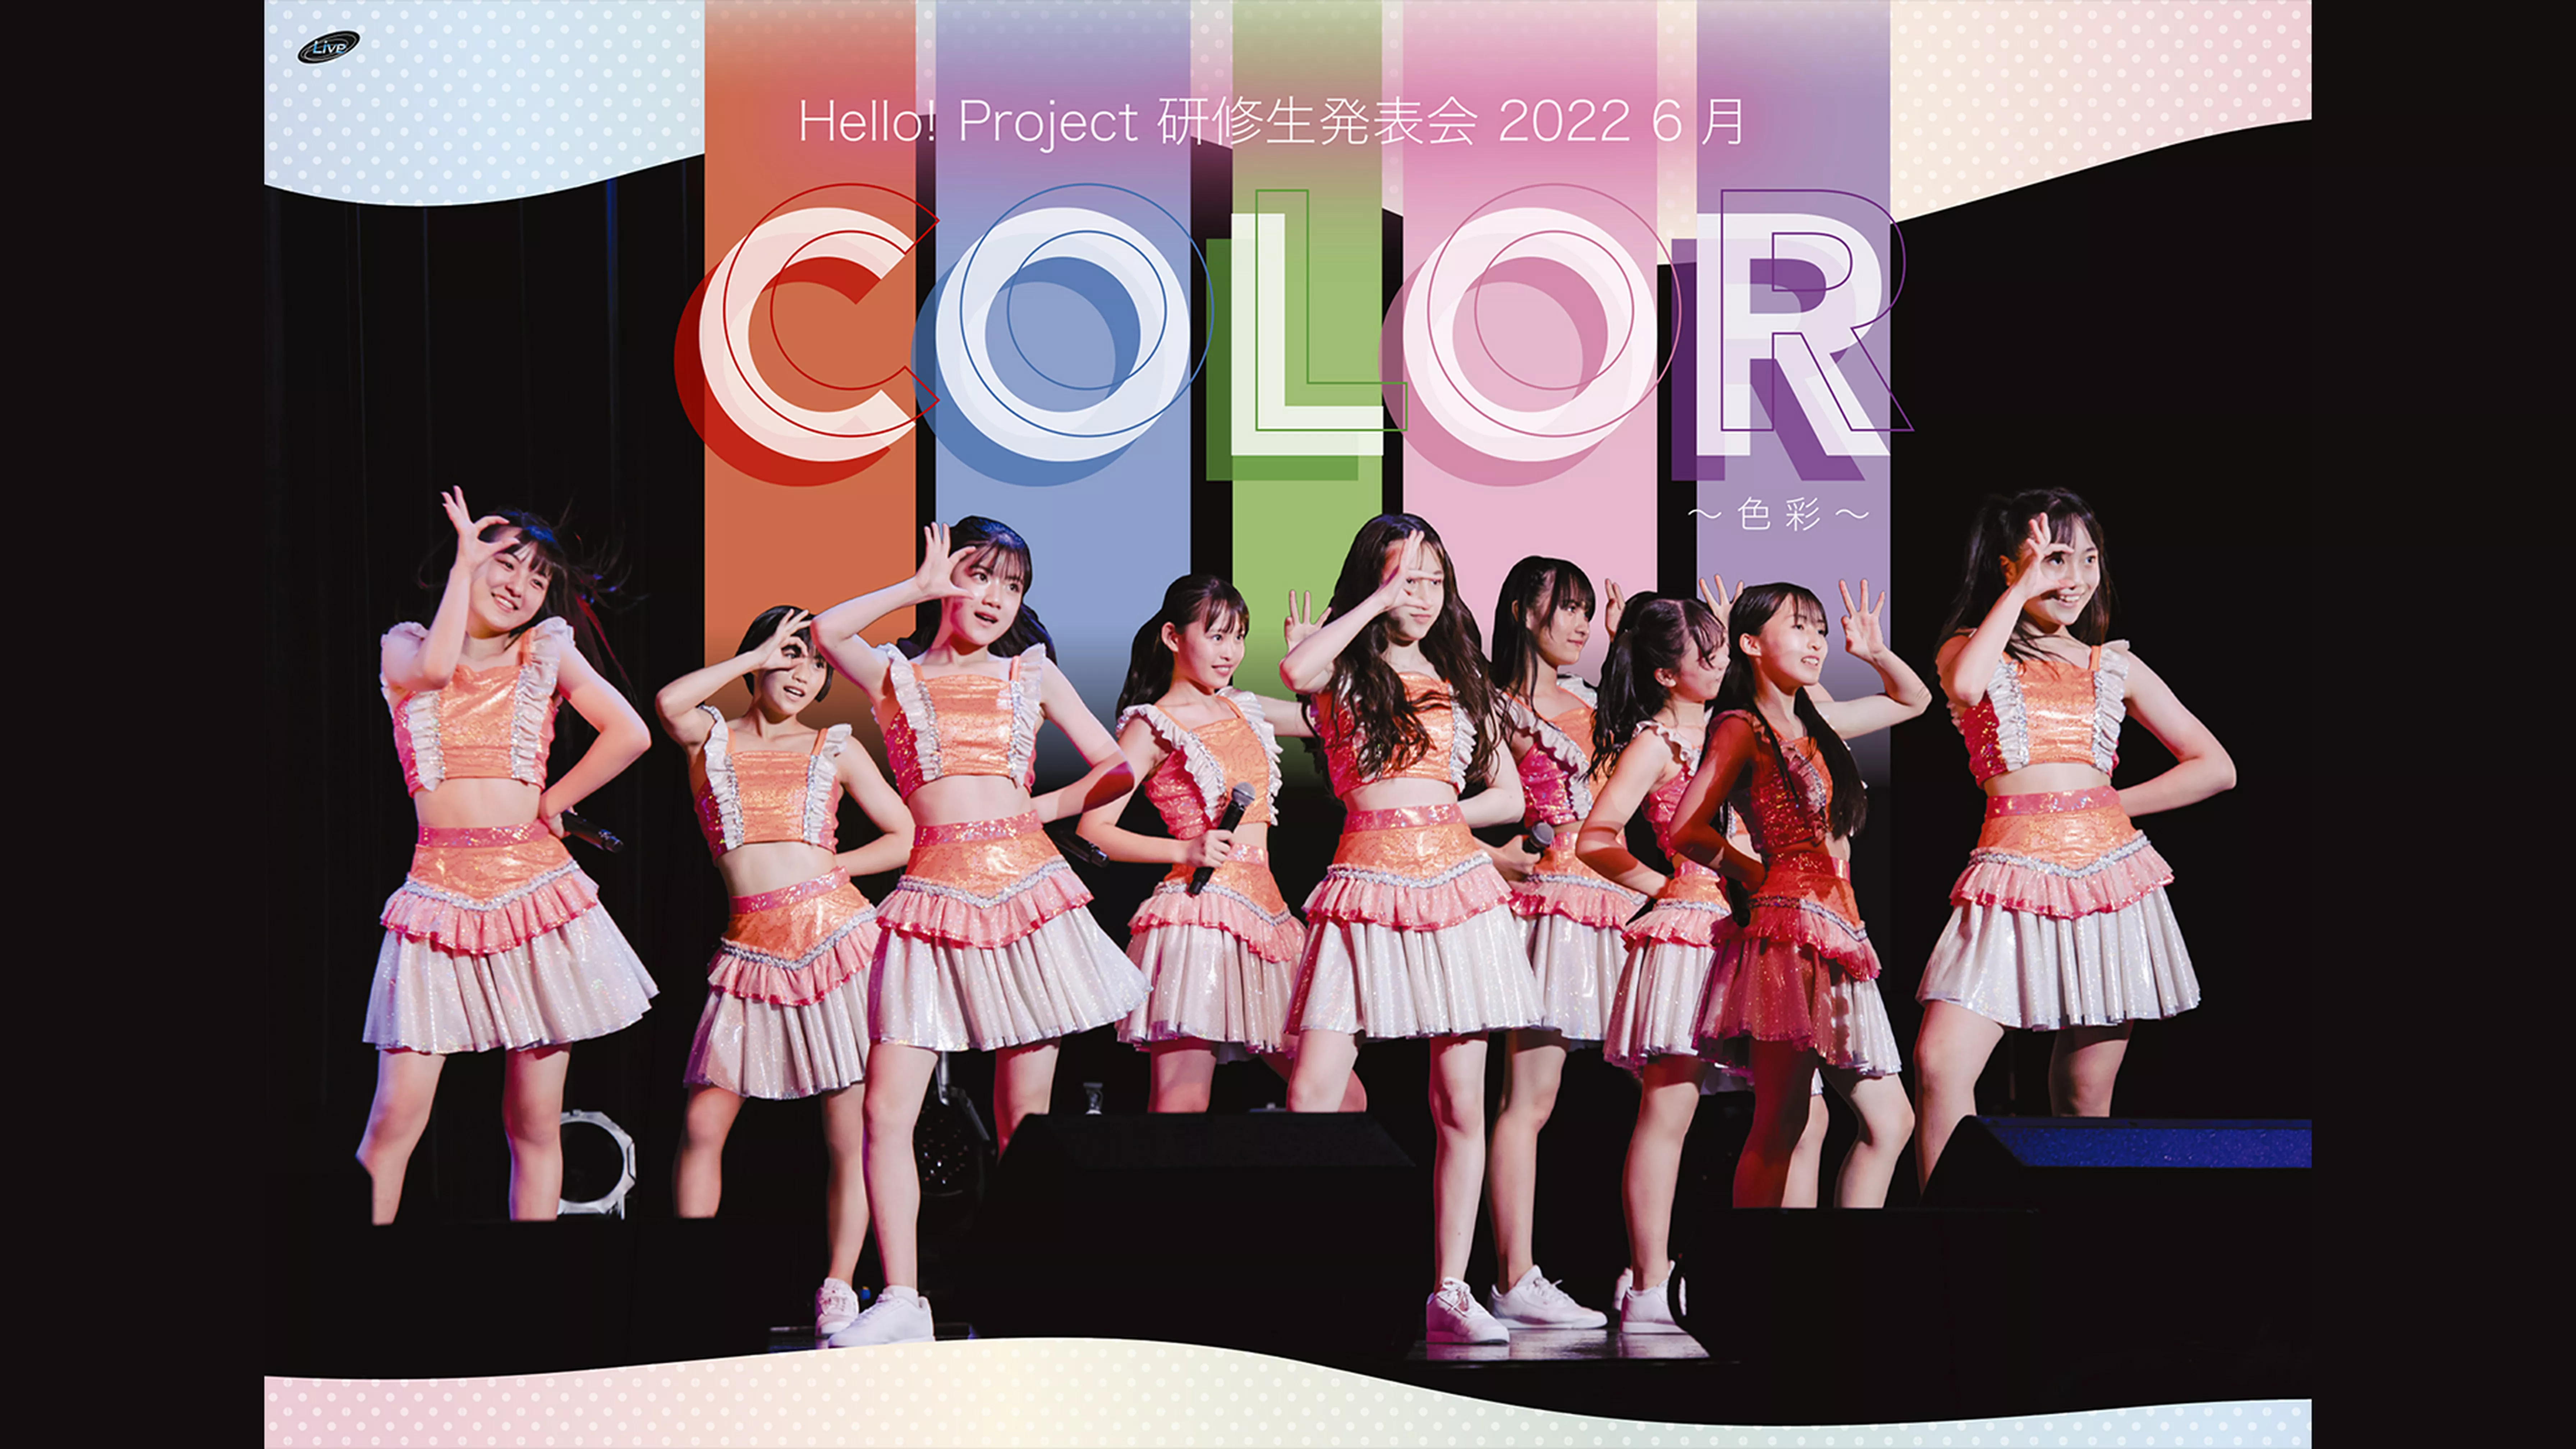 Hello! Project 研修生発表会 2022 6月 COLOR～色彩～